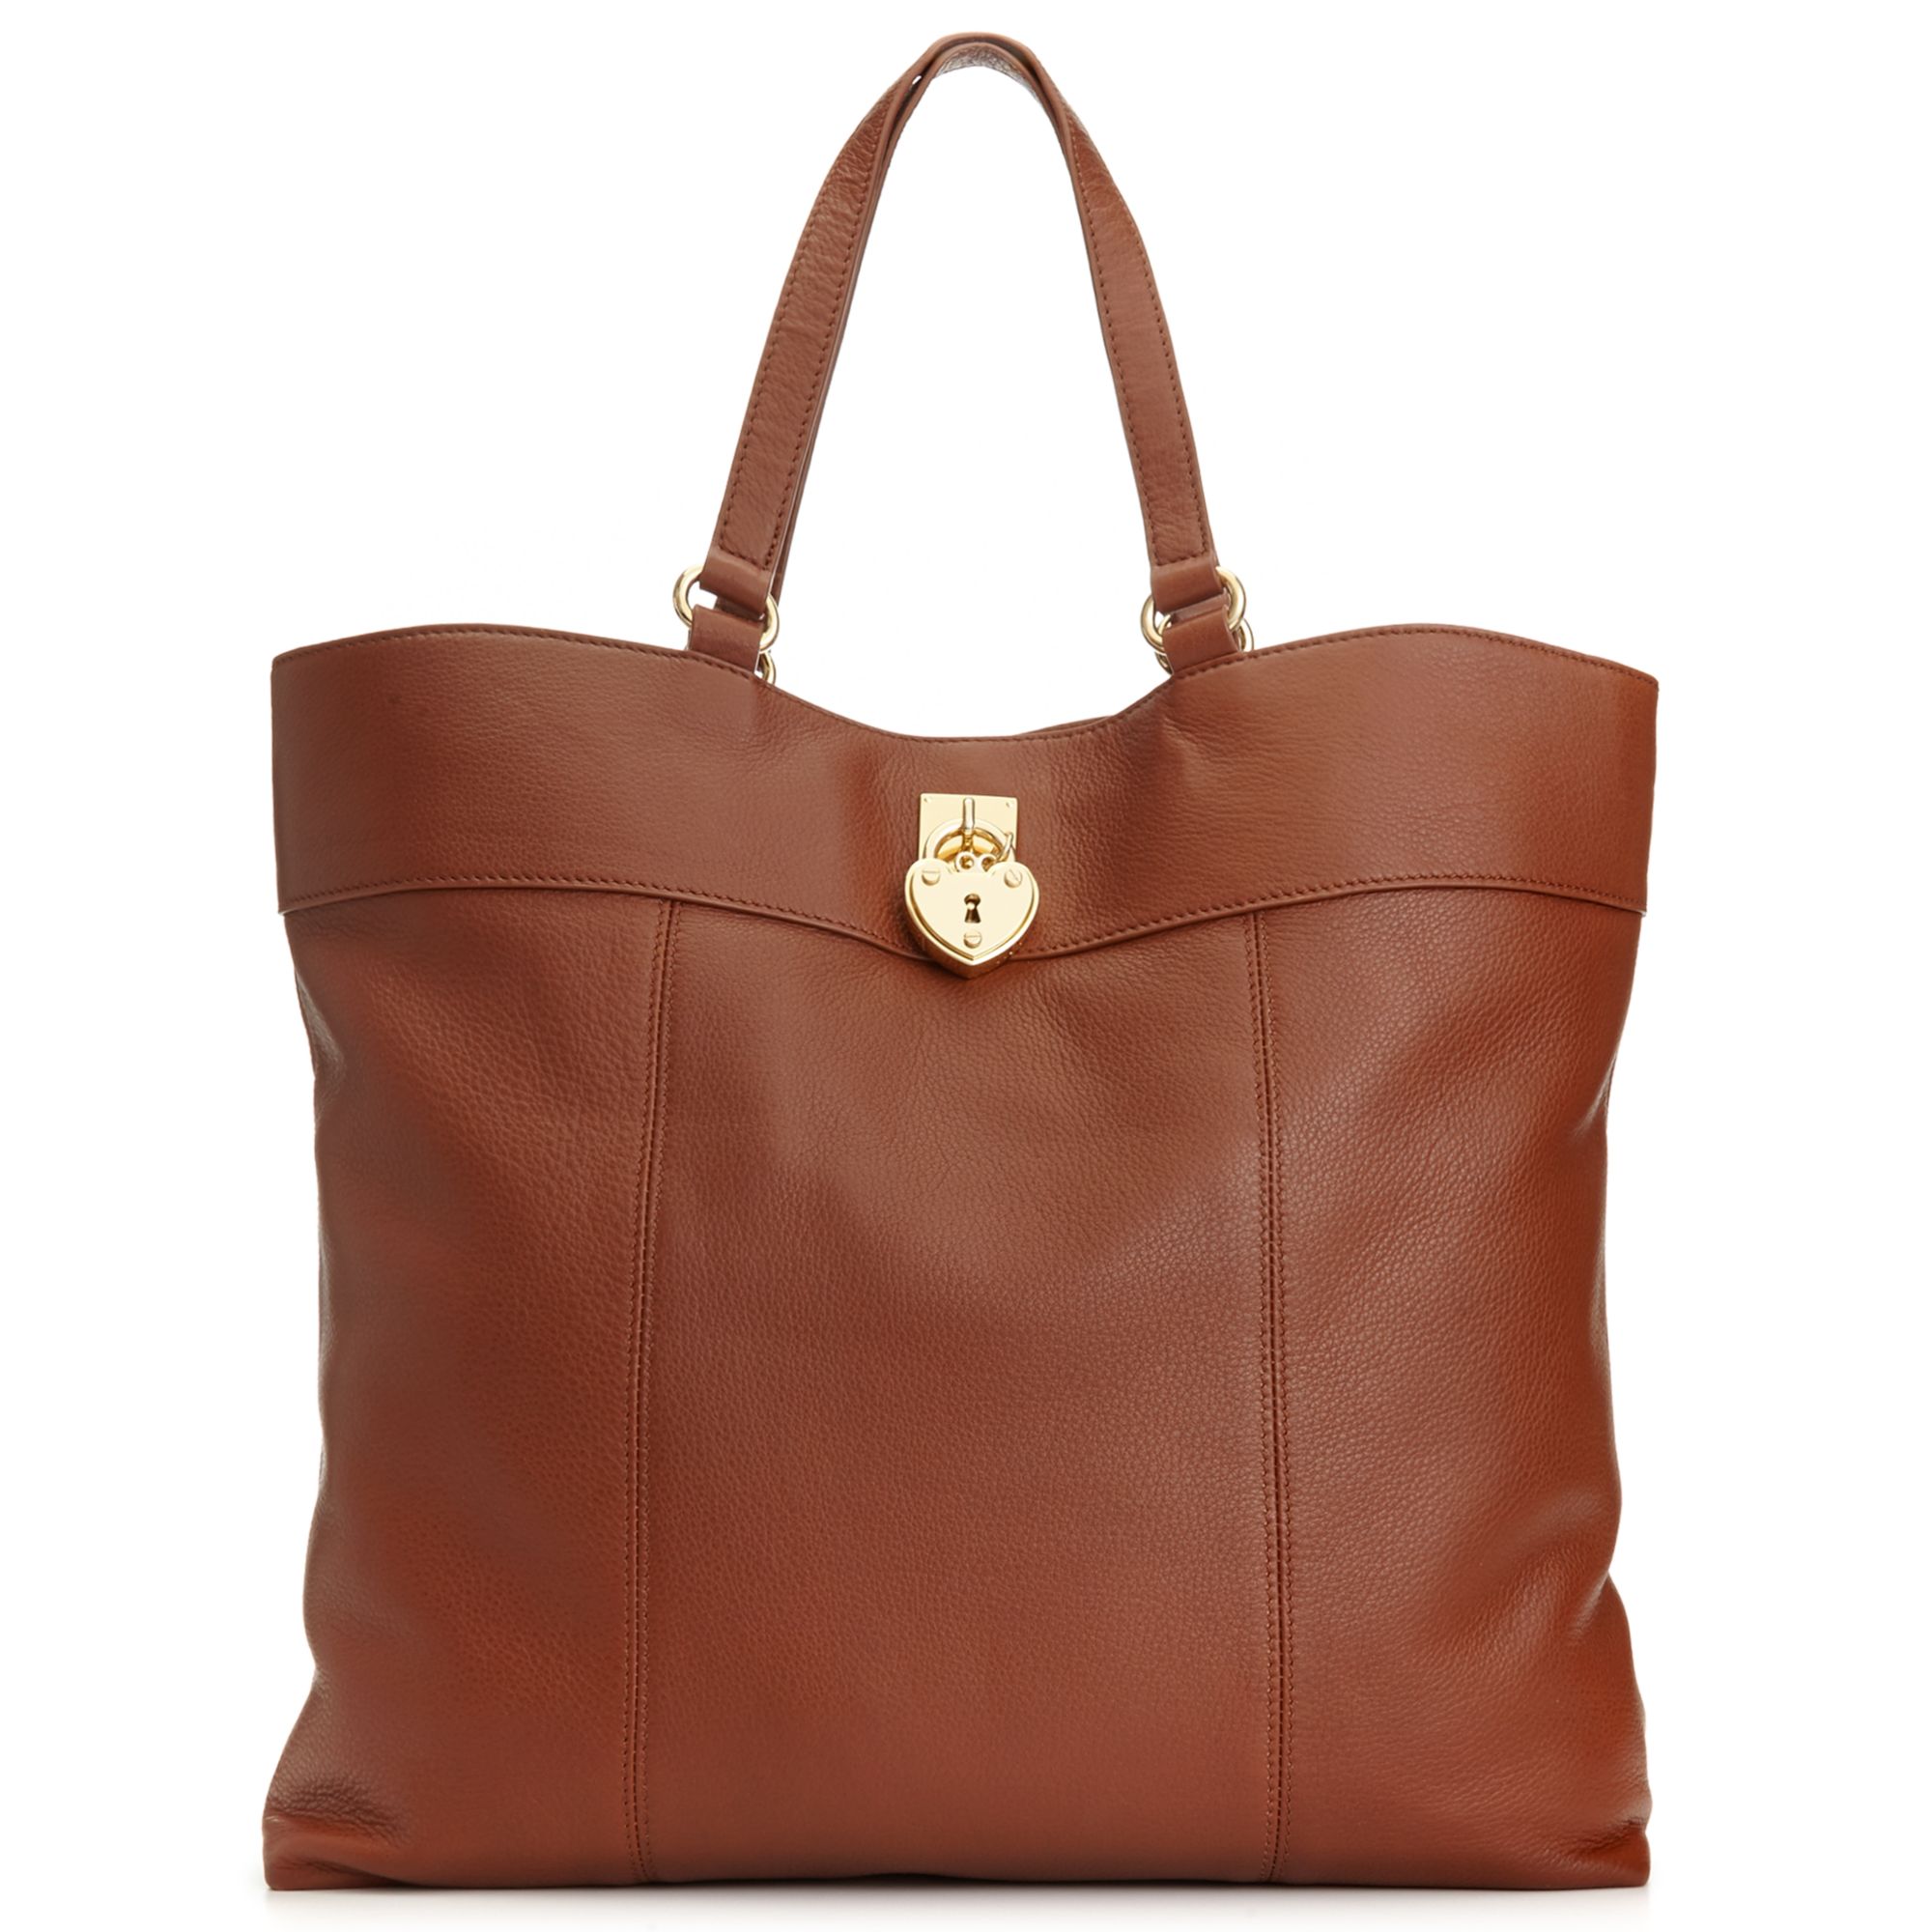 Juicy Couture Robertson Leather Tote in Brown (Cognac) | Lyst